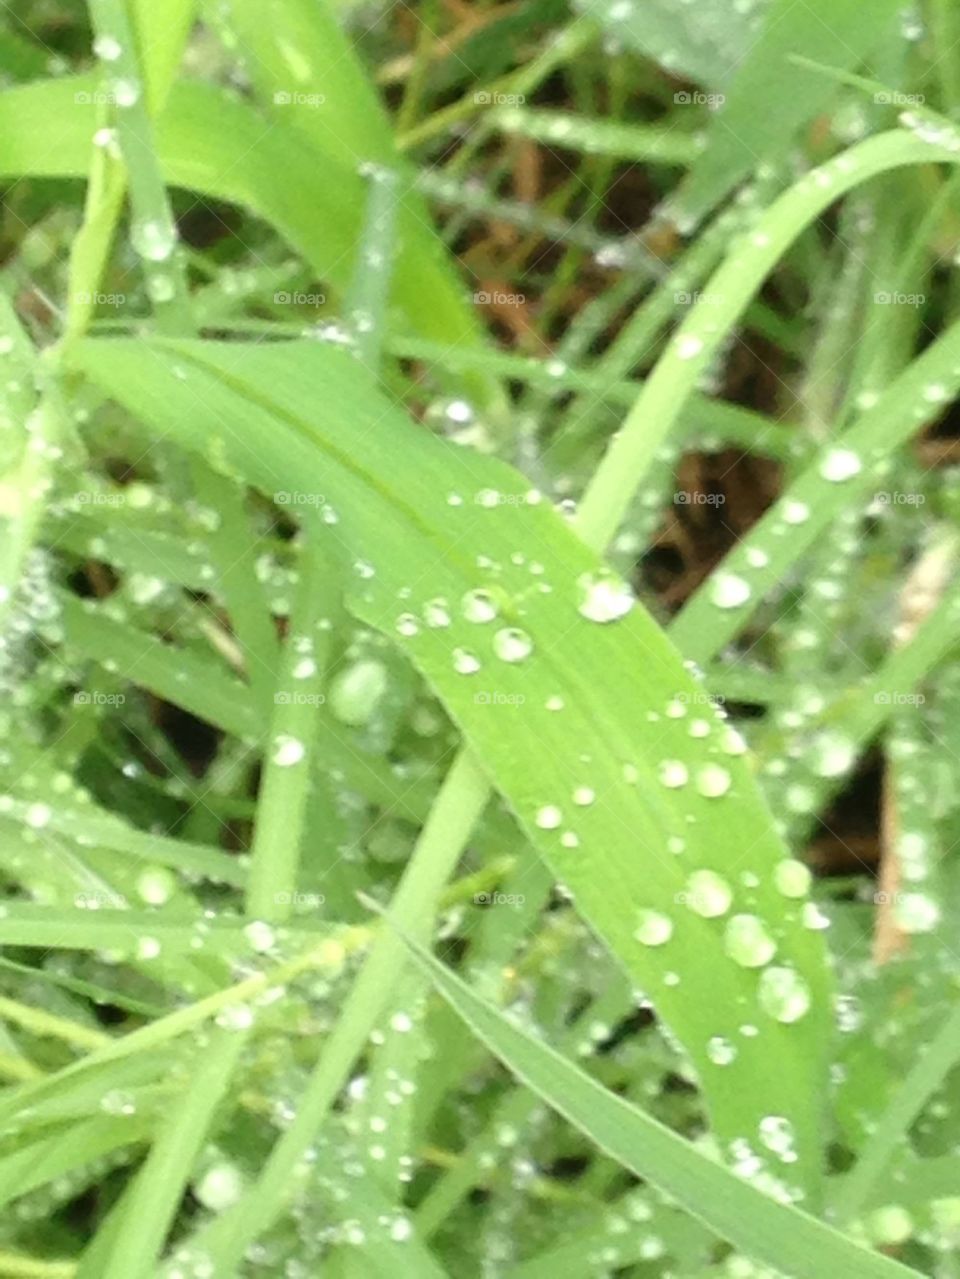 Blades of grass with fallen rain drops on them